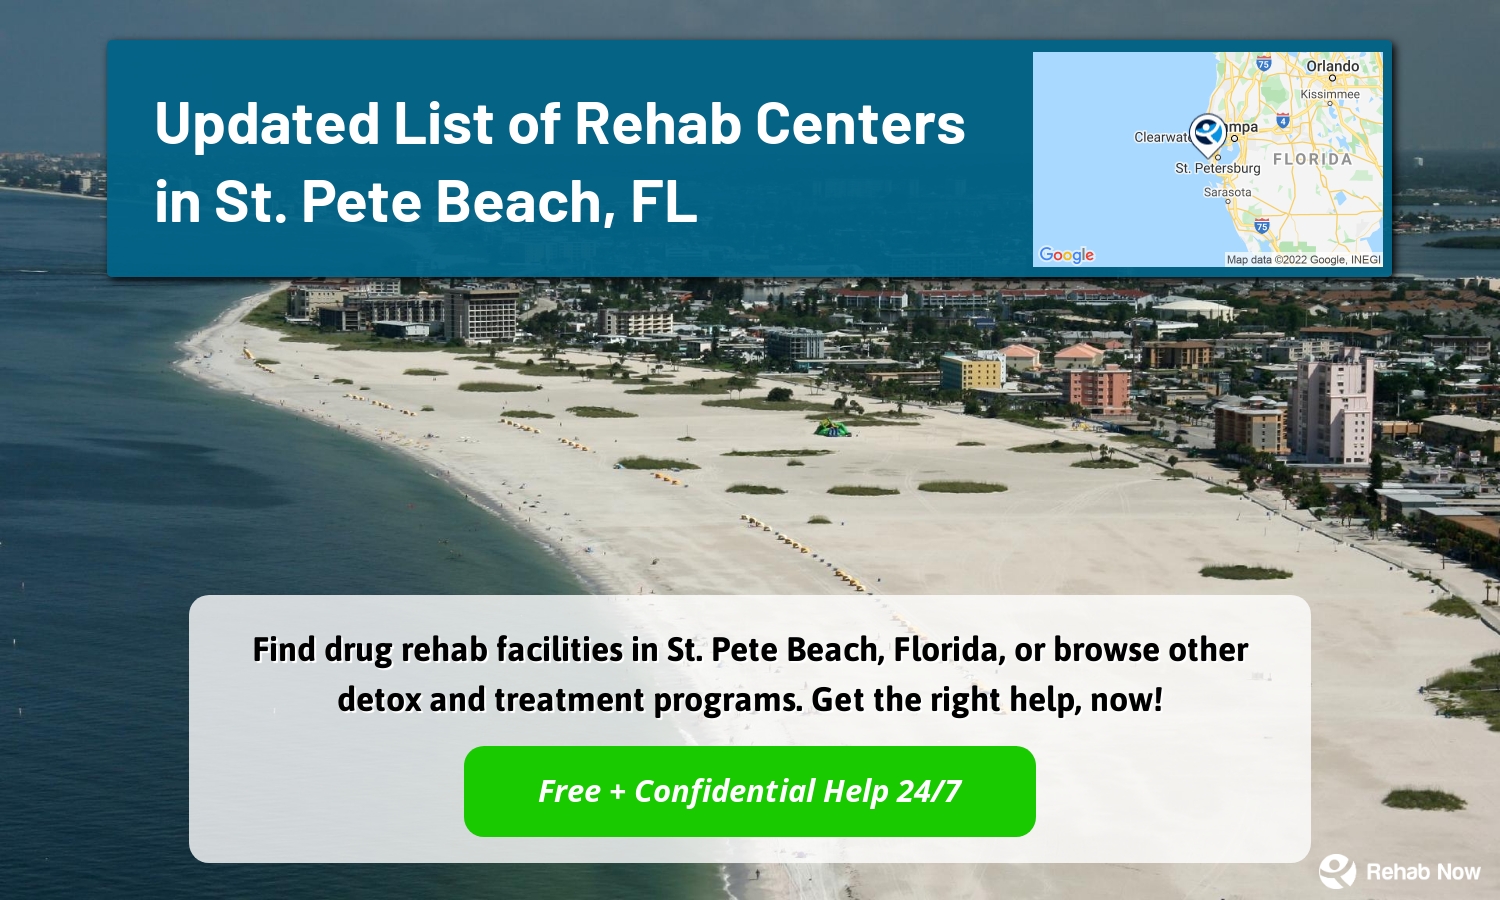 Find drug rehab facilities in St. Pete Beach, Florida, or browse other detox and treatment programs. Get the right help, now!